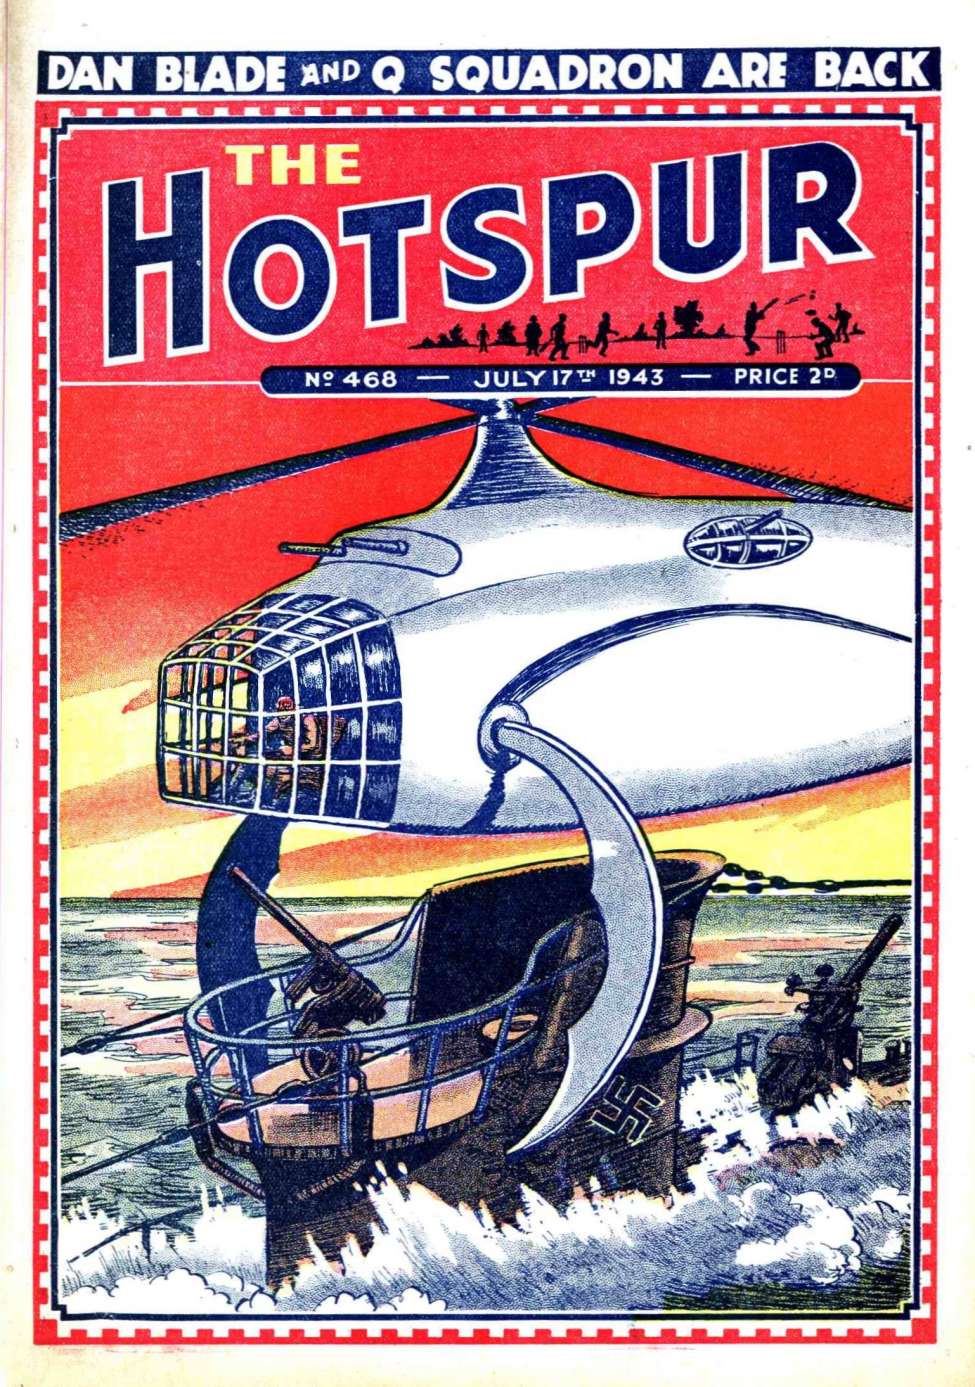 Book Cover For The Hotspur 468